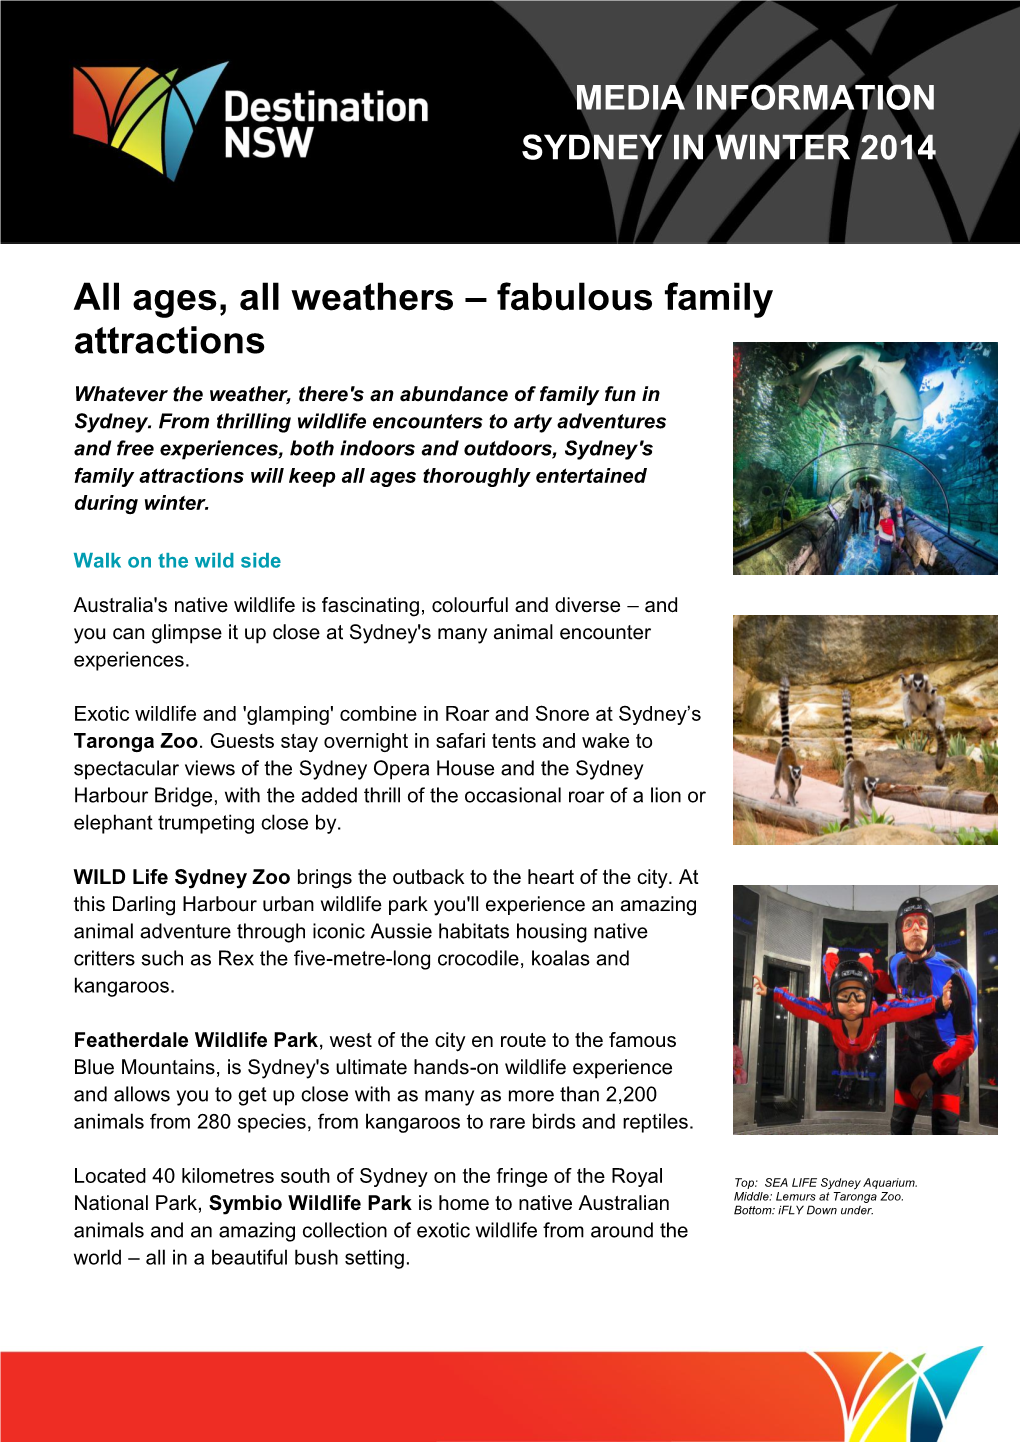 Ages, All Weathers – Fabulous Family Attractions